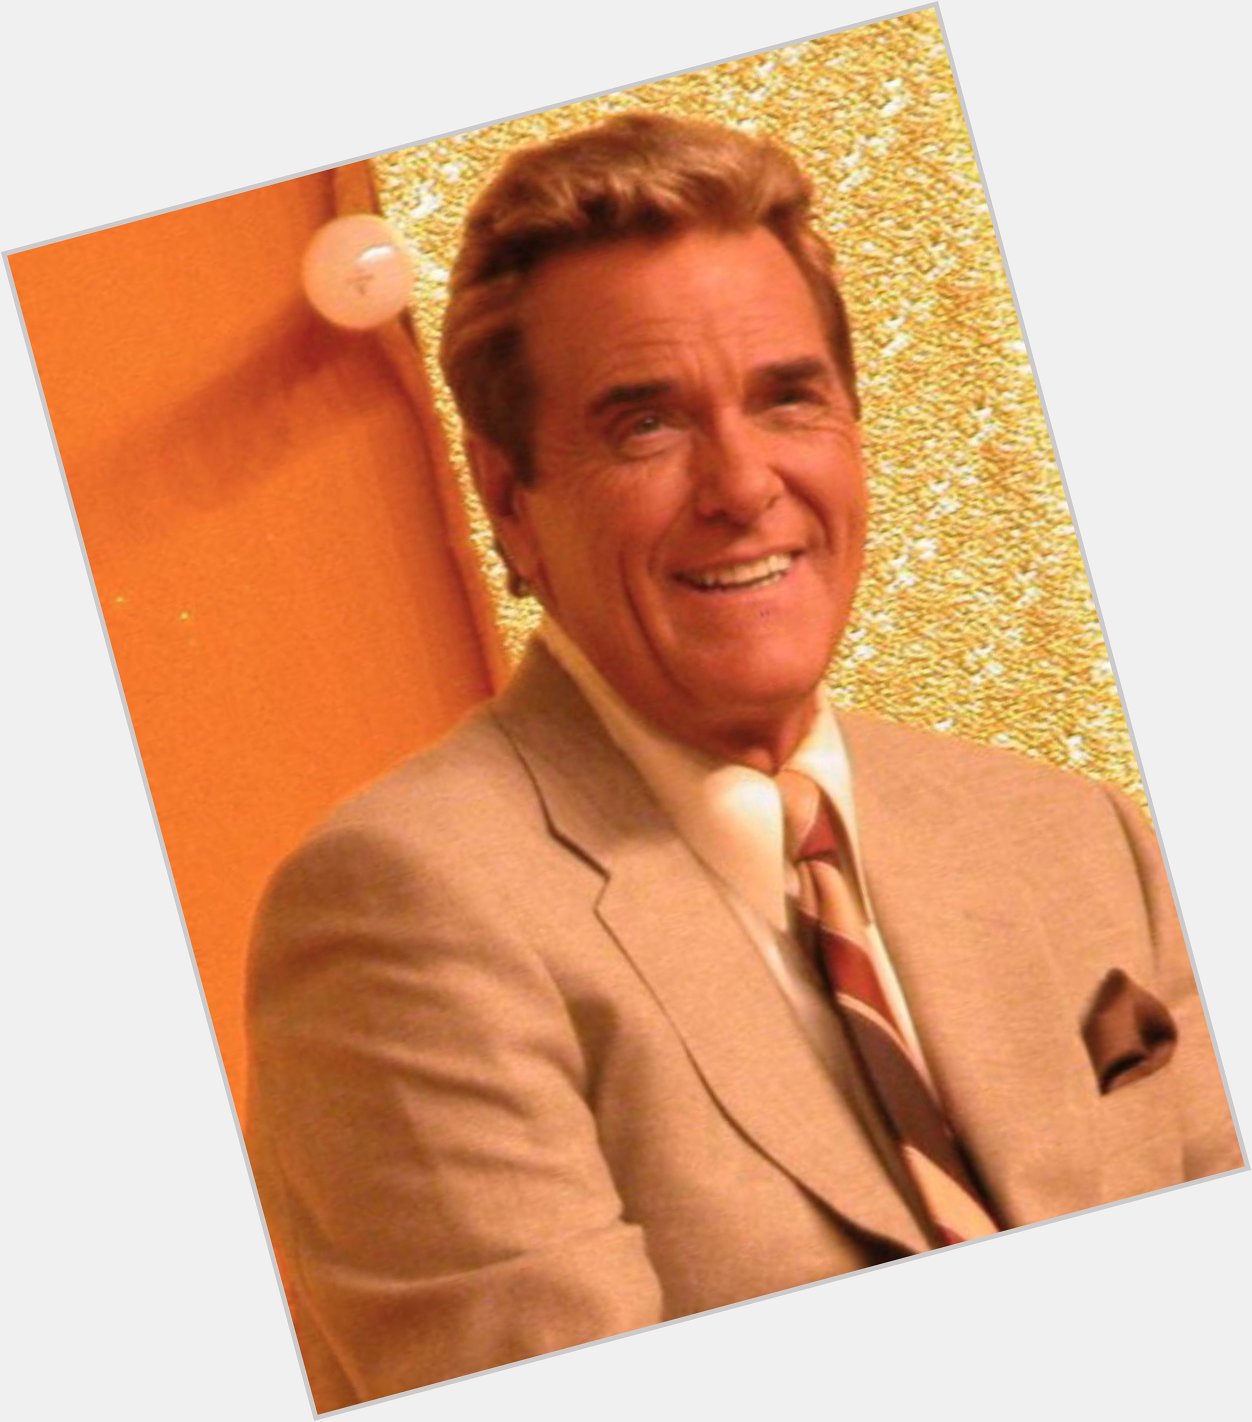 Happy 78th birthday to television icon, Chuck Woolery! 